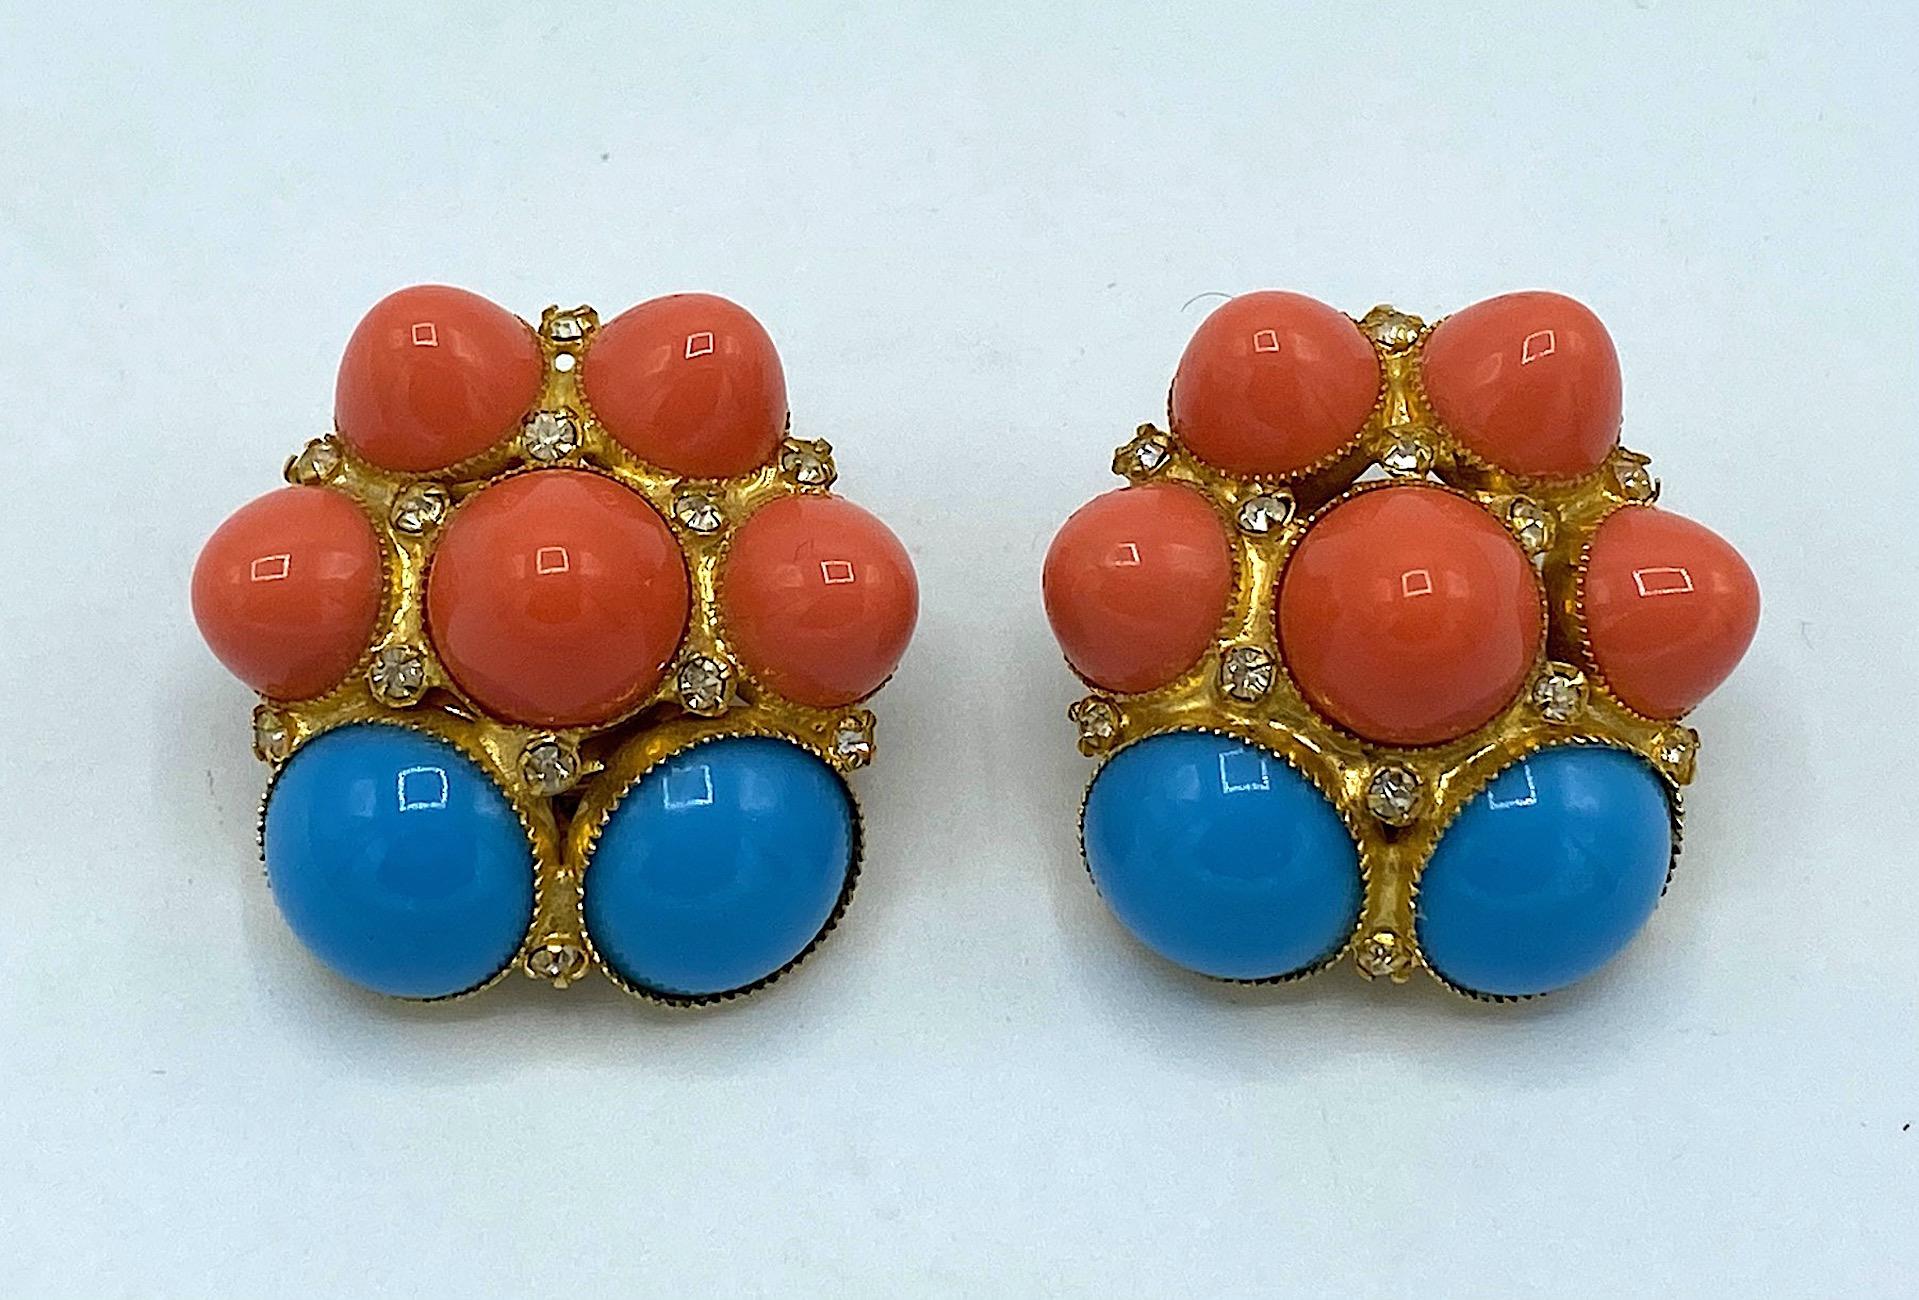 De Lillo 1970s Faux Coral & Turquoise Bracelet and Earrings 9